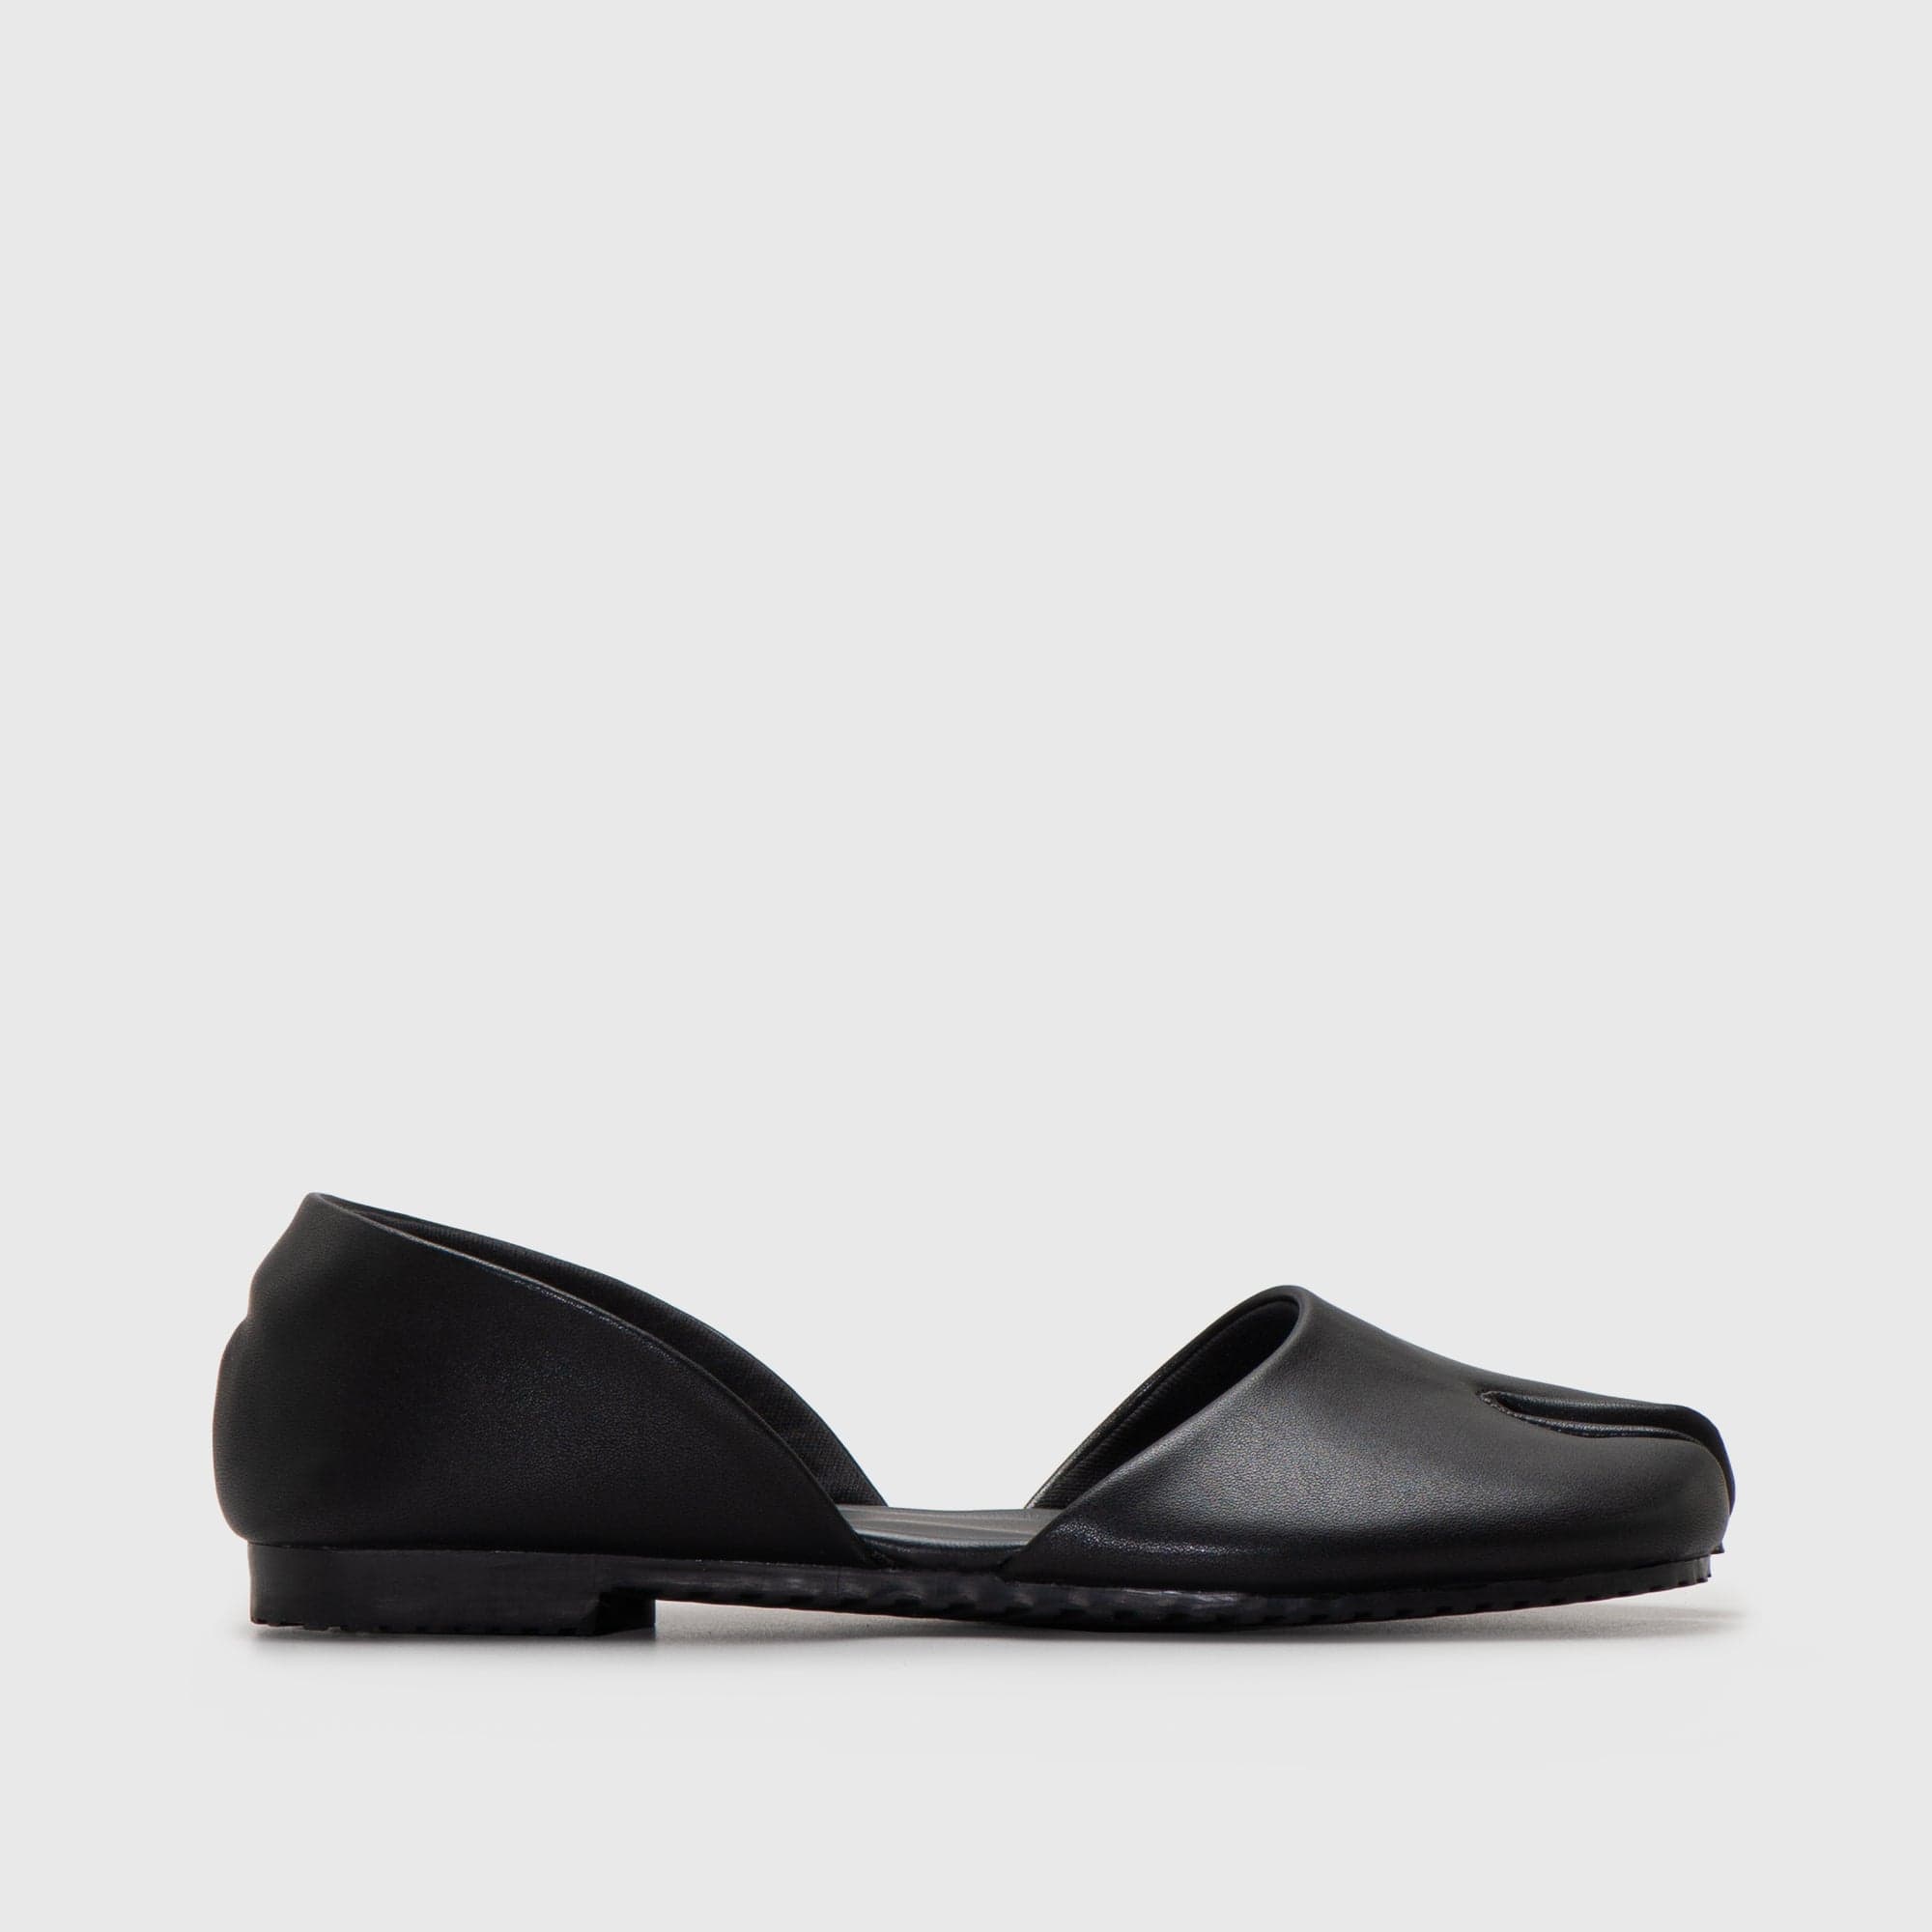 Adorable Projects Official Adorableprojects - Zeyena Flat Shoes Black - Tabi Flat Shoes